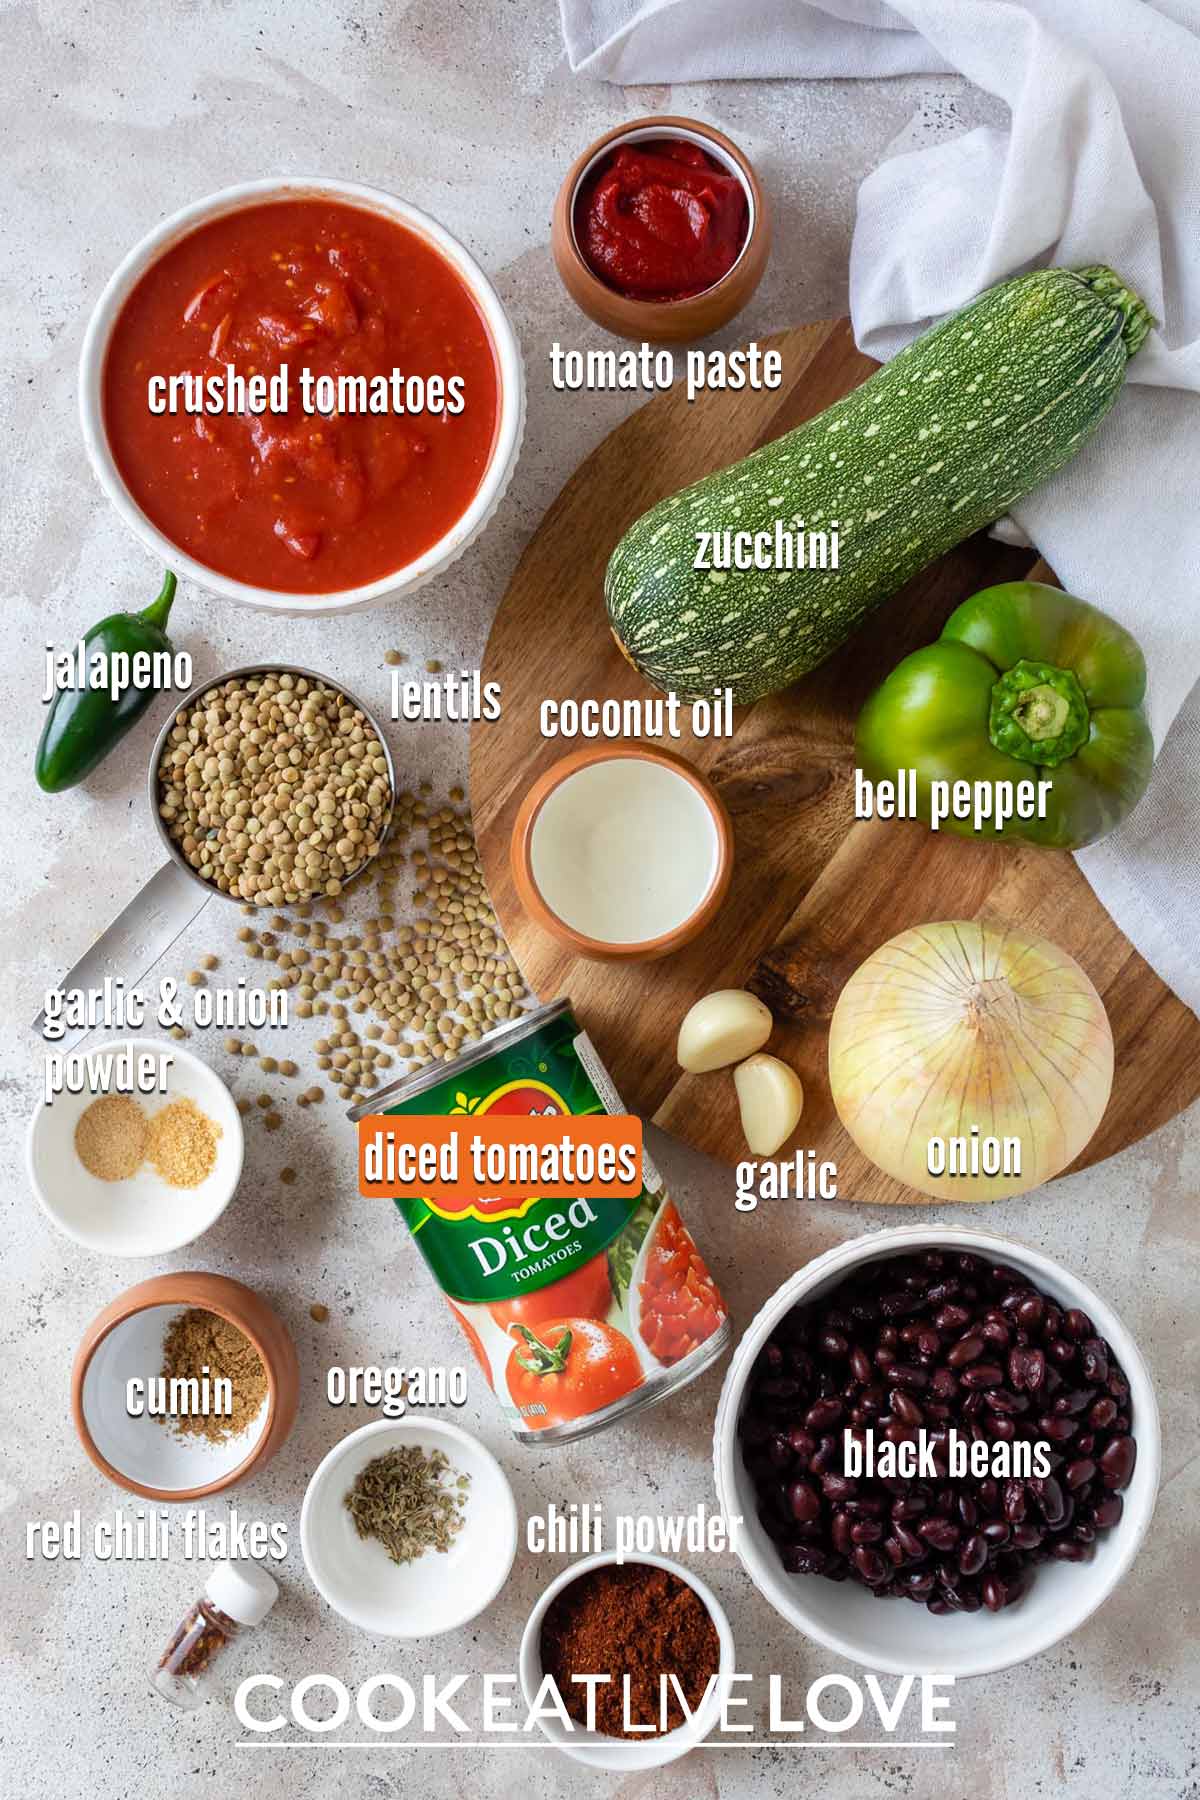 Ingredients to make slow cooker vegetarian chili on the table.